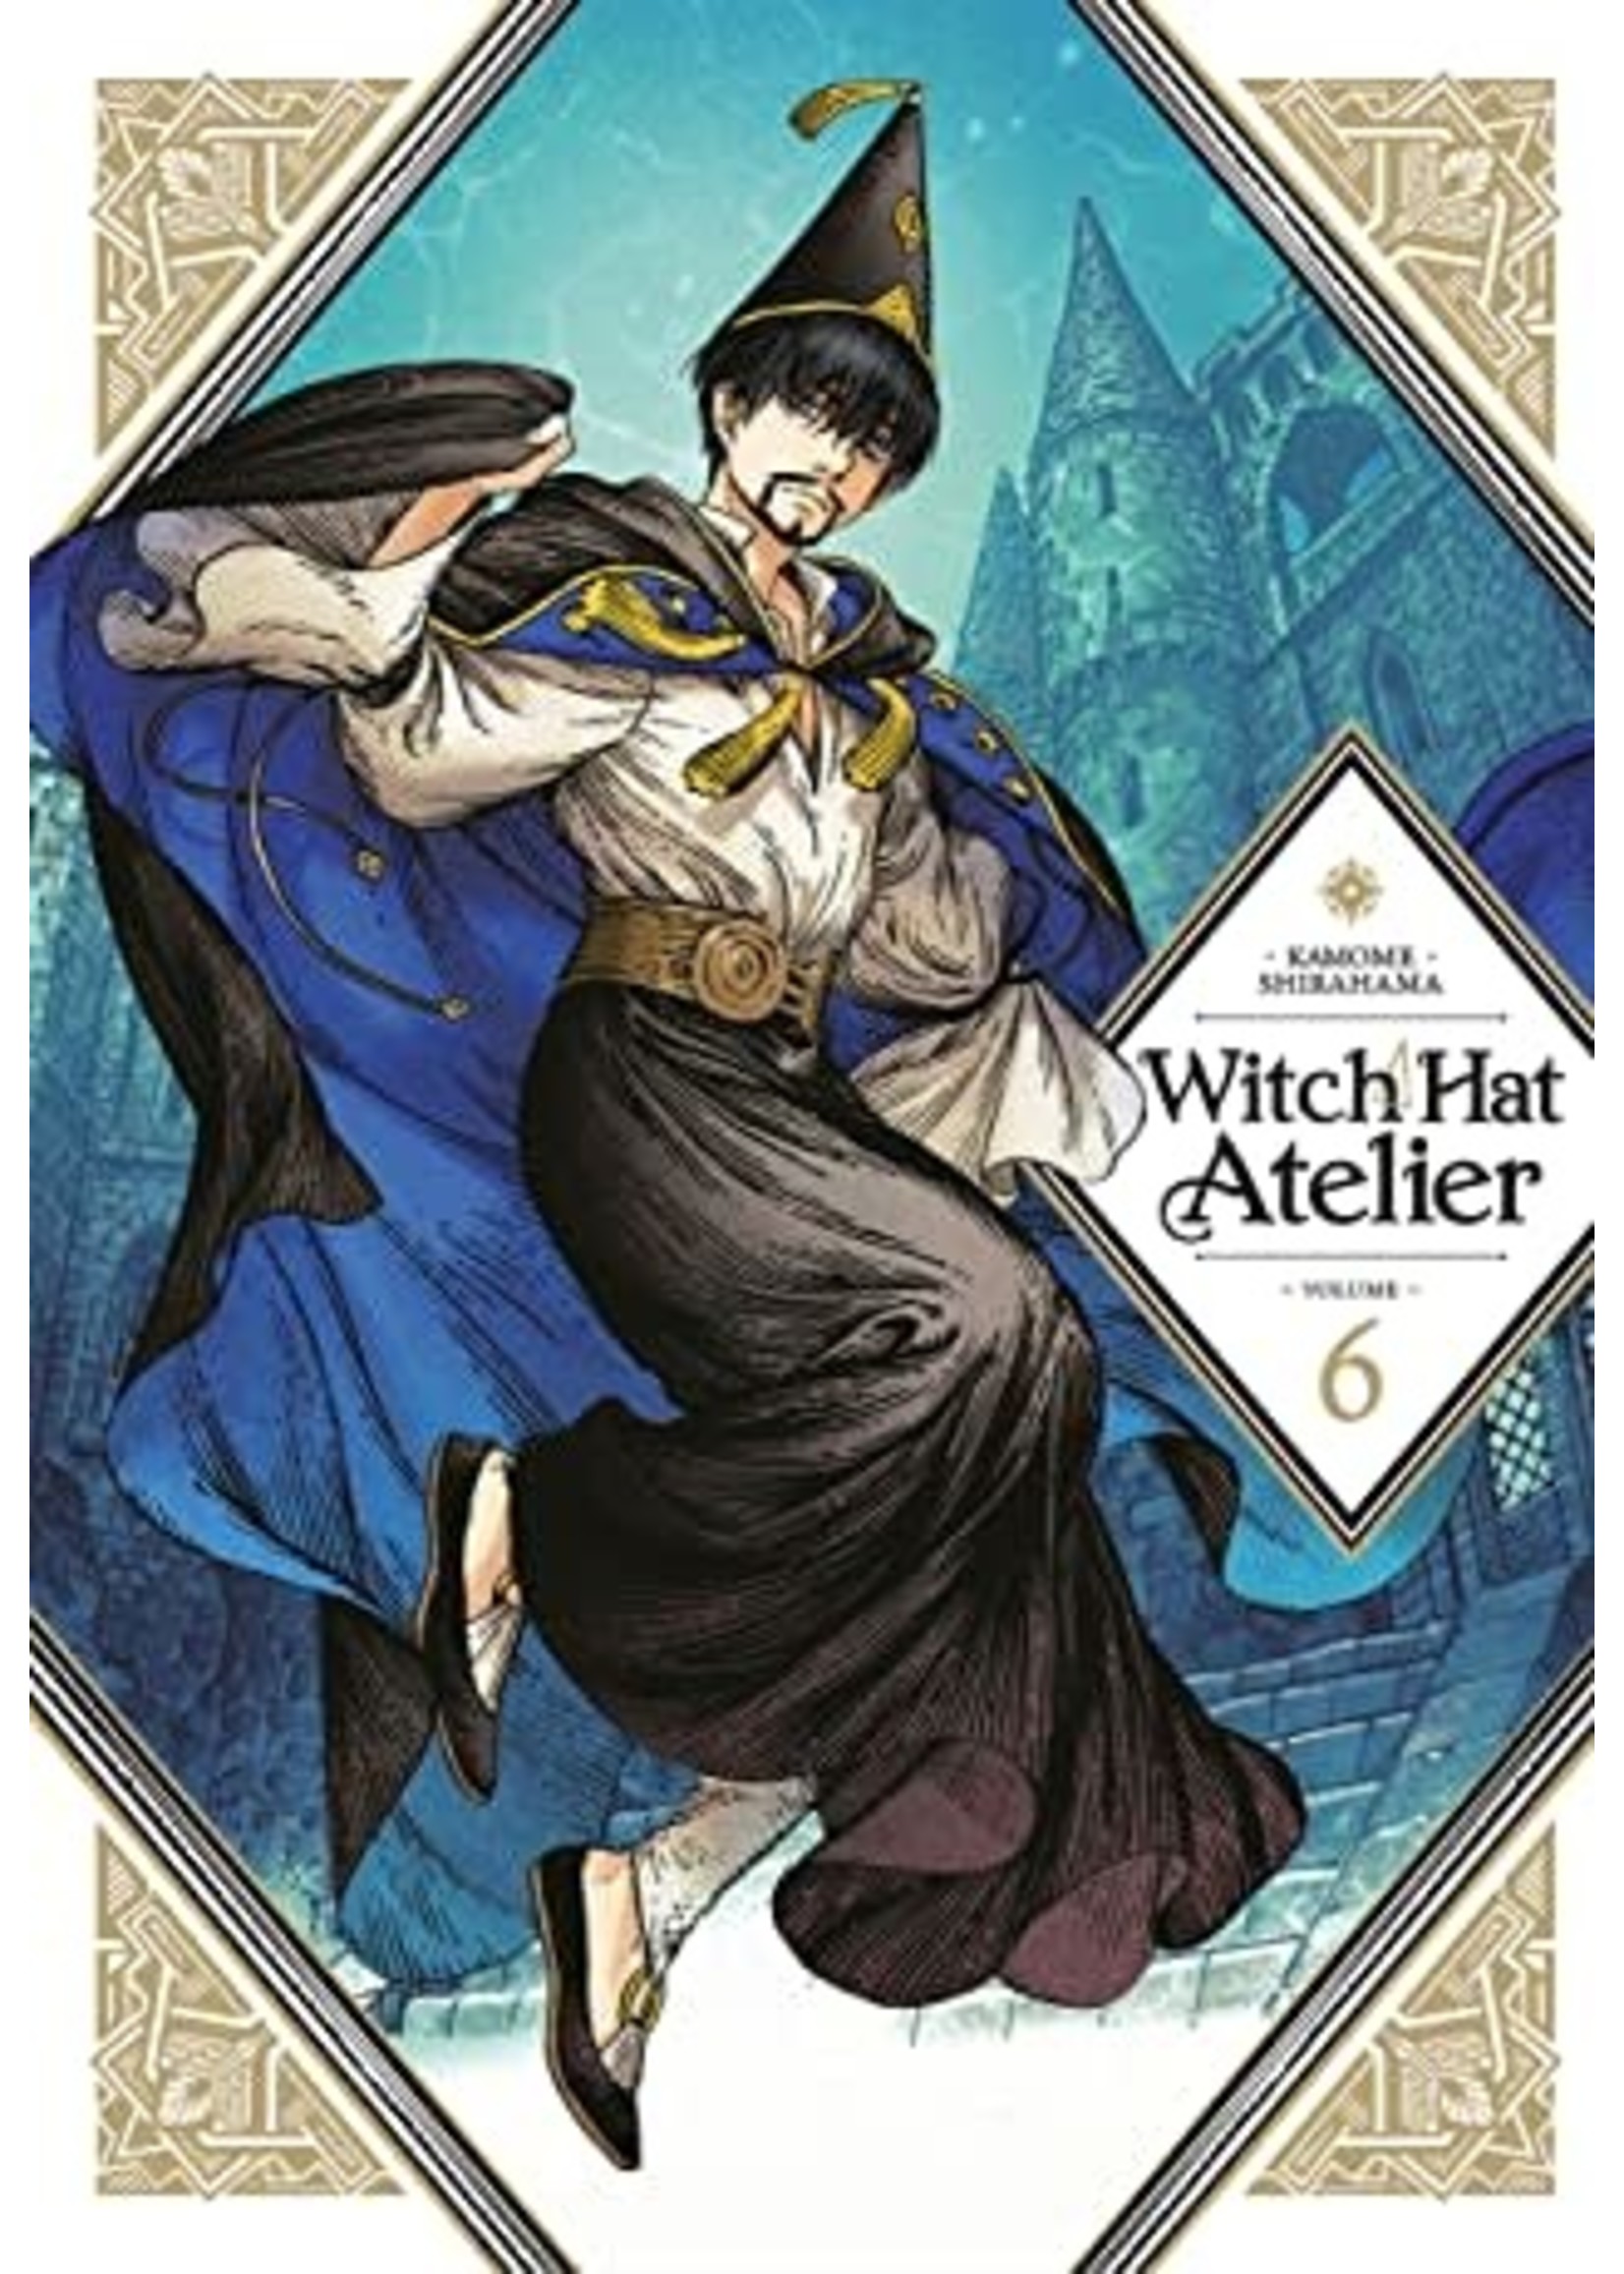 Witch Hat Atelier, Vol. 6 by Kamome Shirahama